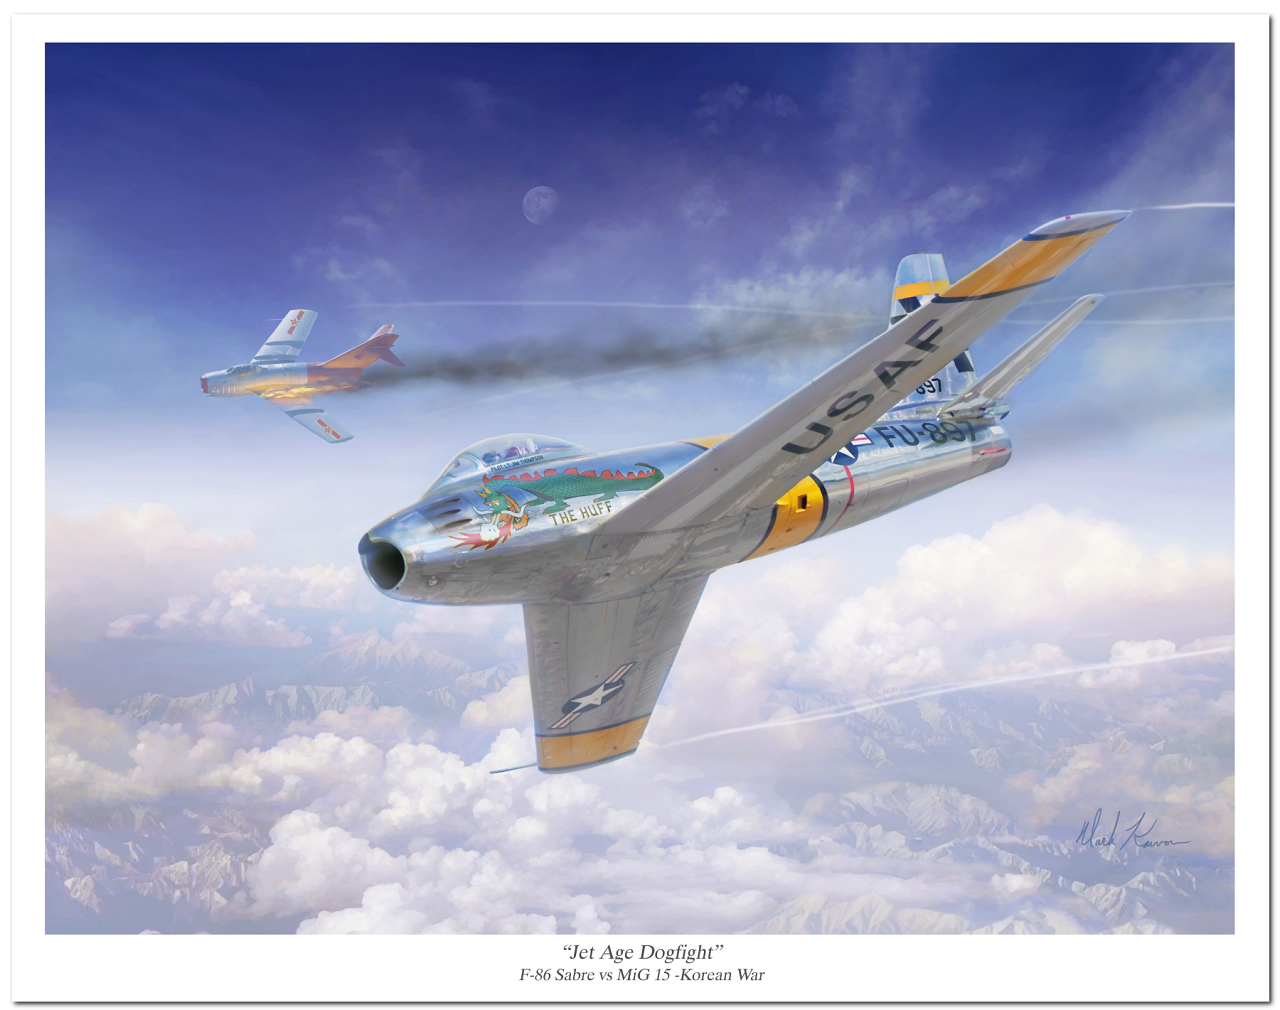 "Jet Age Dog Fight" by Mark Karvon featuring the USAF F-86 Sabre